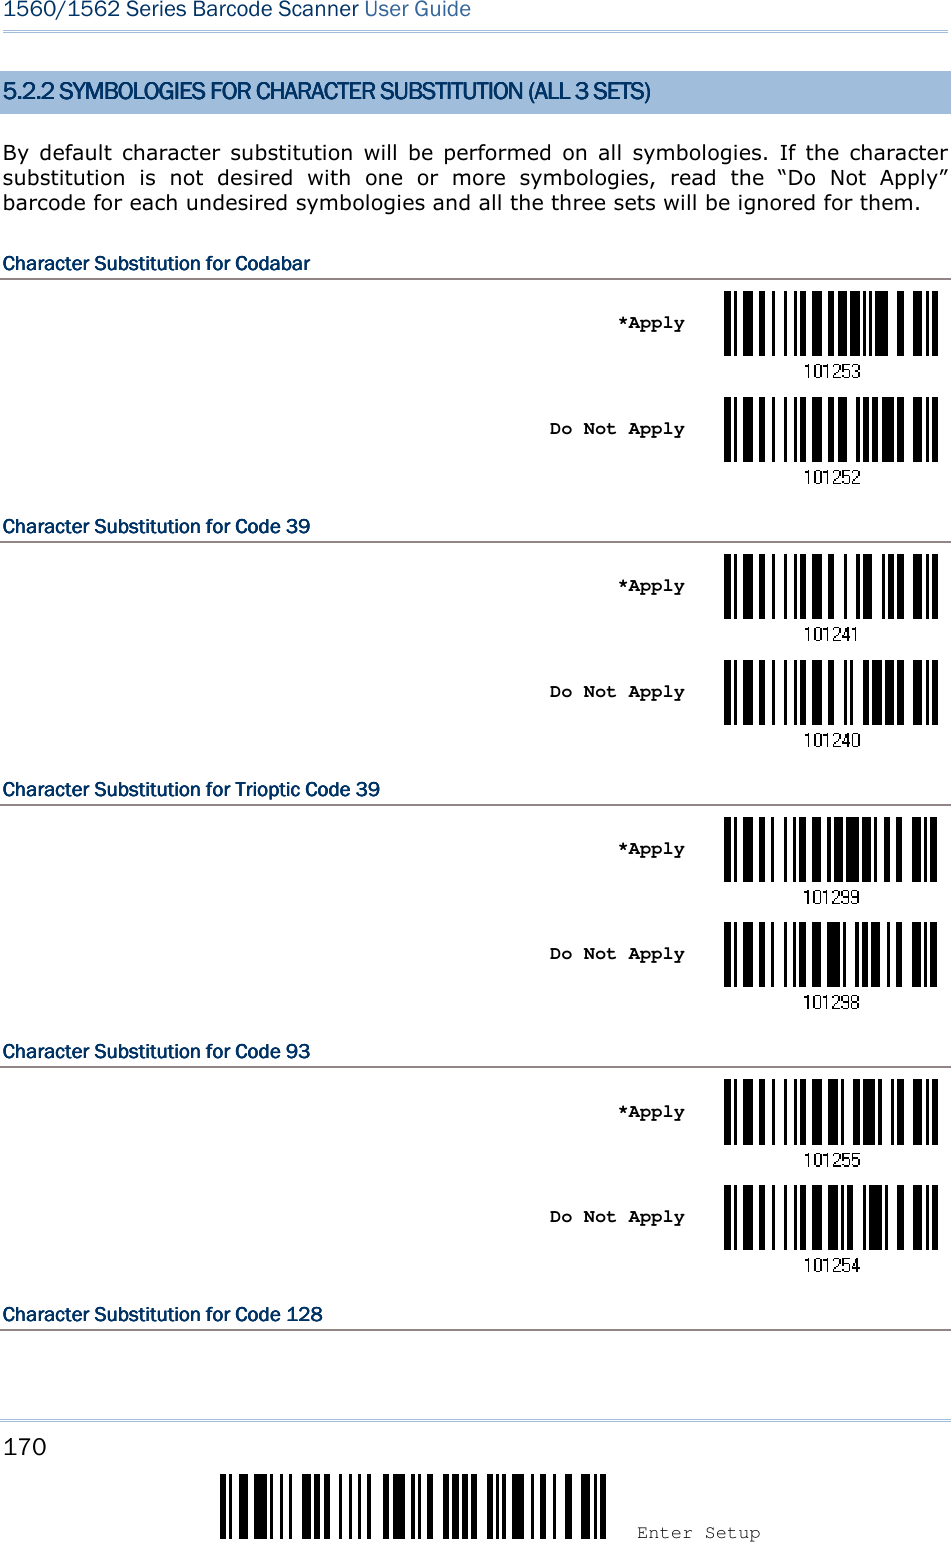 170 Enter Setup 1560/1562 Series Barcode Scanner User Guide  5.2.2 SYMBOLOGIES FO5.2.2 SYMBOLOGIES FO5.2.2 SYMBOLOGIES FO5.2.2 SYMBOLOGIES FOR CHARACTER SUBSTITUR CHARACTER SUBSTITUR CHARACTER SUBSTITUR CHARACTER SUBSTITUTION (ALL 3 SETS)TION (ALL 3 SETS)TION (ALL 3 SETS)TION (ALL 3 SETS)    By  default  character  substitution  will  be  performed  on  all  symbologies.  If  the  character substitution  is  not  desired  with  one  or  more  symbologies,  read  the  “Do  Not  Apply” barcode for each undesired symbologies and all the three sets will be ignored for them. Character SubstitutionCharacter SubstitutionCharacter SubstitutionCharacter Substitution    for for for for CodabarCodabarCodabarCodabar       *Apply     Do Not Apply  Character SubstitutionCharacter SubstitutionCharacter SubstitutionCharacter Substitution    for for for for Code 39Code 39Code 39Code 39       *Apply     Do Not Apply  Character SubstitutionCharacter SubstitutionCharacter SubstitutionCharacter Substitution    for Trioptic for Trioptic for Trioptic for Trioptic Code 39Code 39Code 39Code 39       *Apply     Do Not Apply  Character SubstitutionCharacter SubstitutionCharacter SubstitutionCharacter Substitution    for for for for Code 93Code 93Code 93Code 93       *Apply     Do Not Apply  Character SubstitutionCharacter SubstitutionCharacter SubstitutionCharacter Substitution    for for for for Code 128Code 128Code 128Code 128    